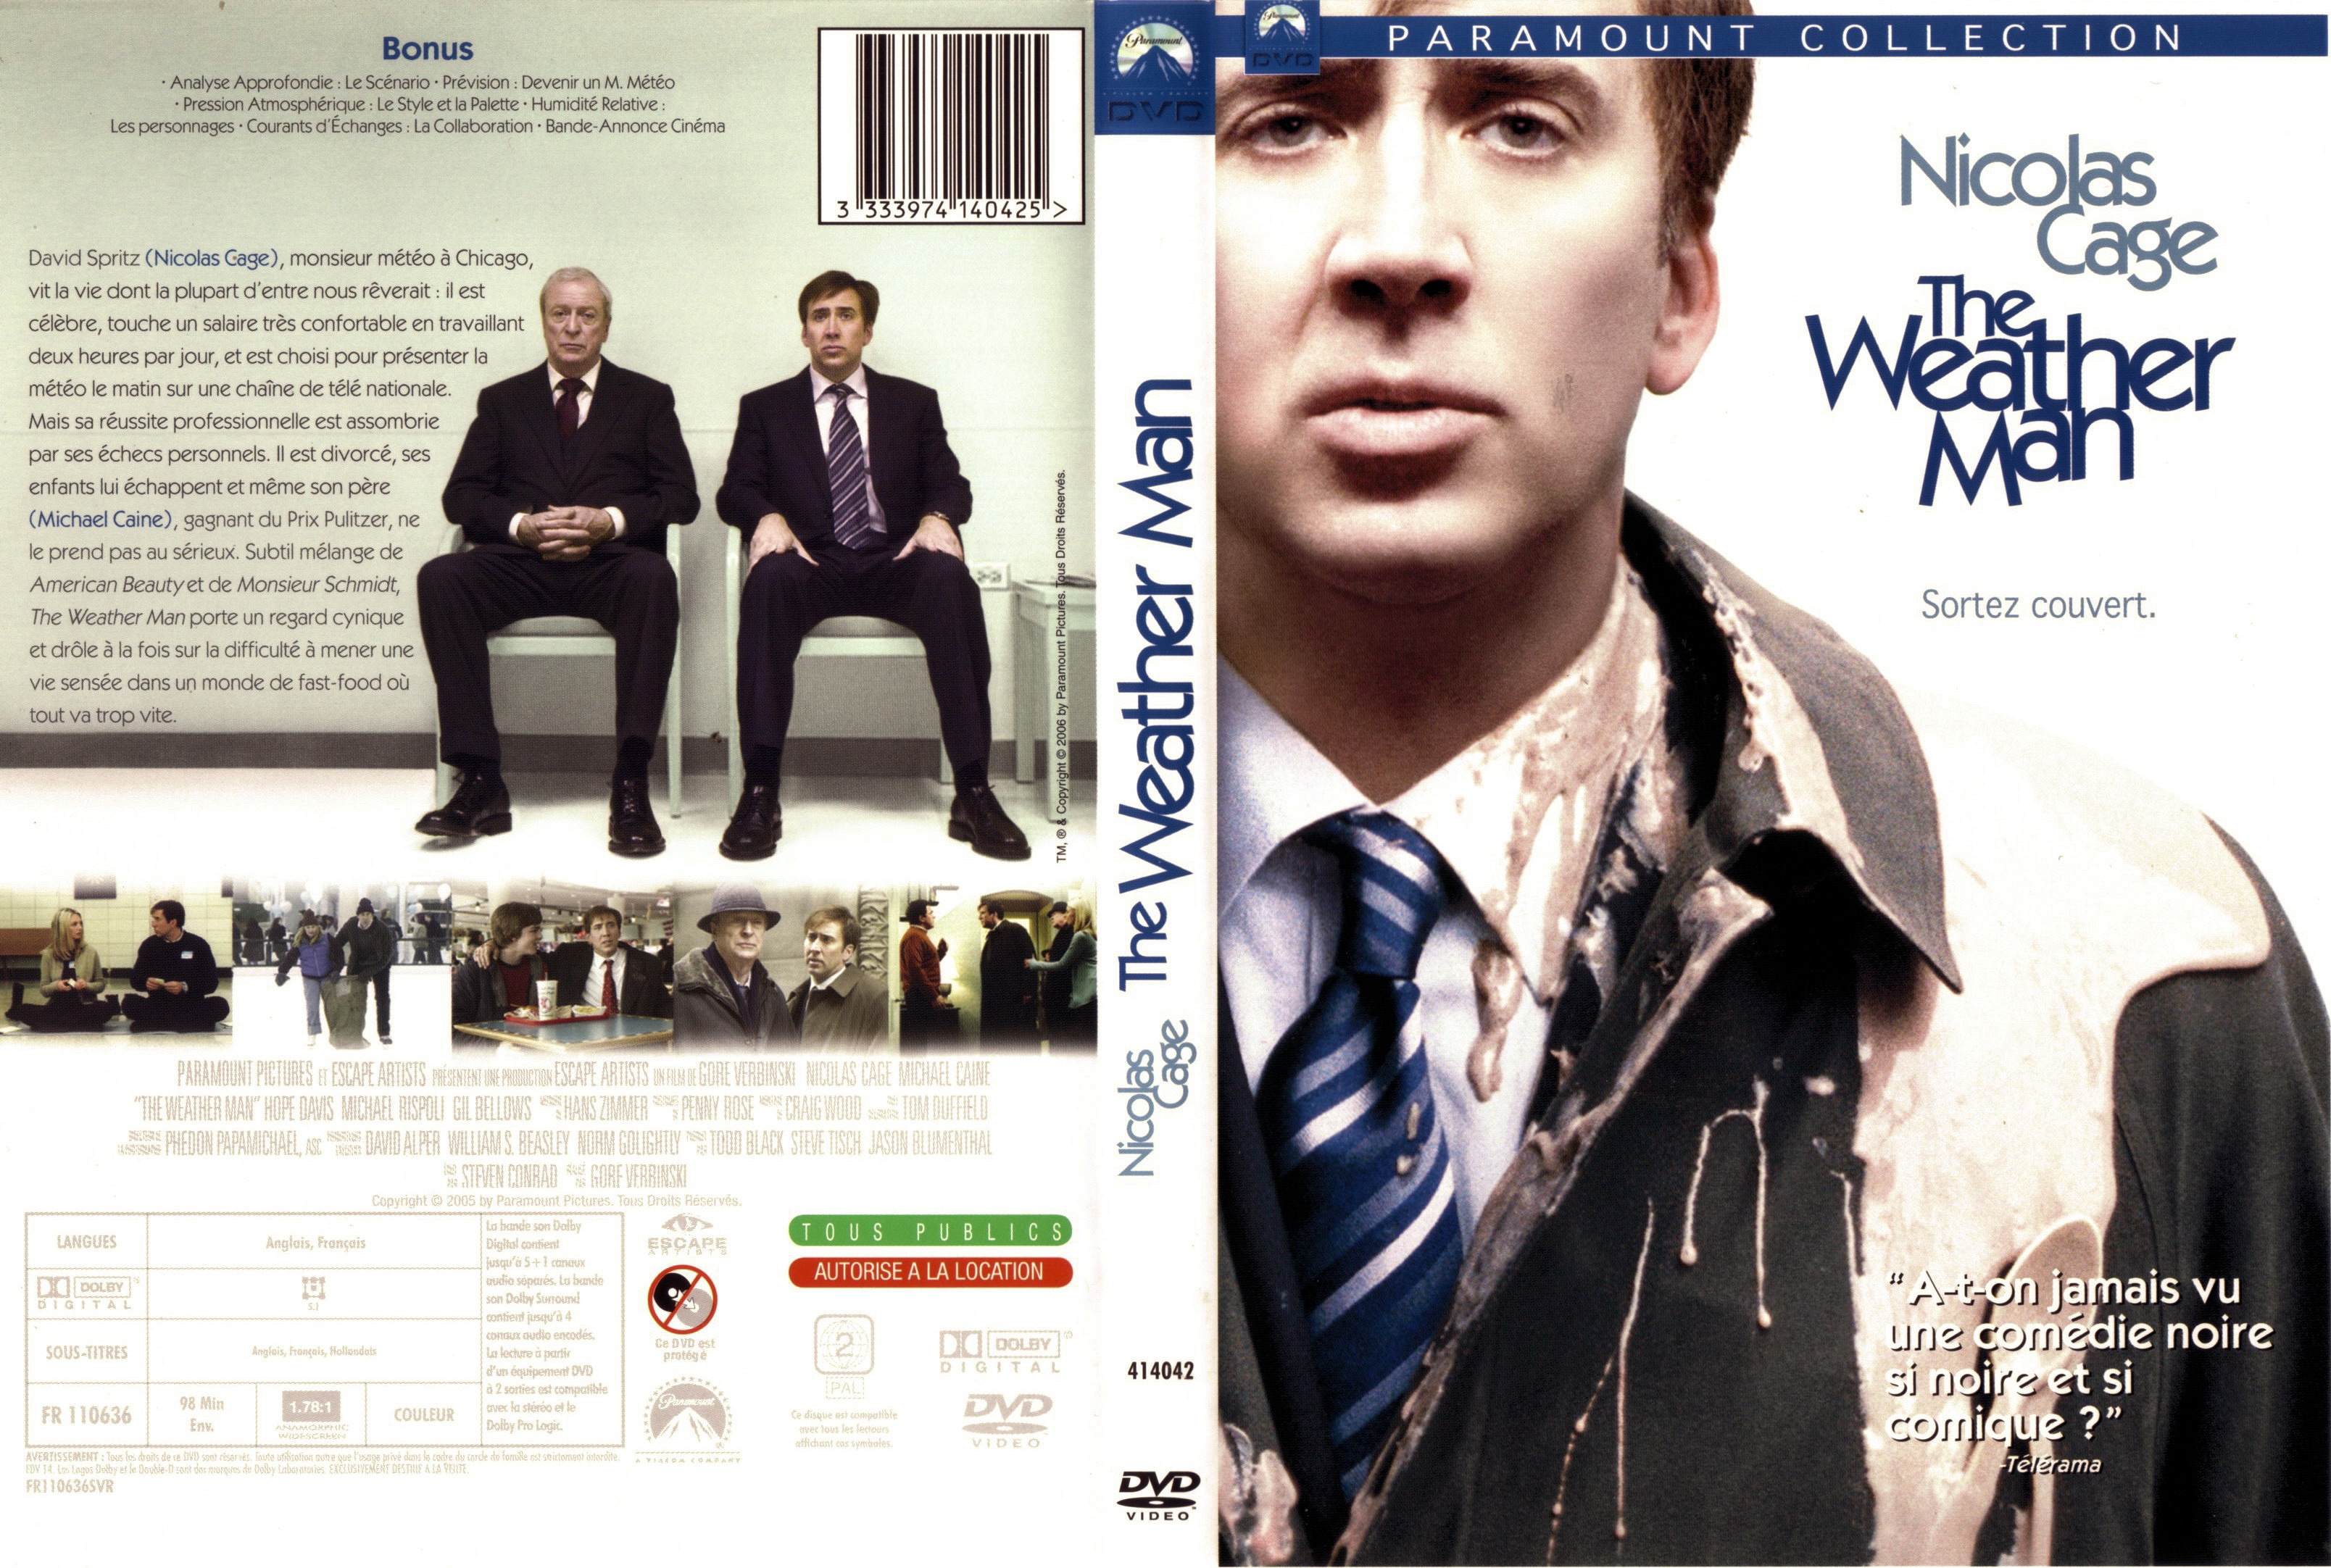 Jaquette DVD The weather man